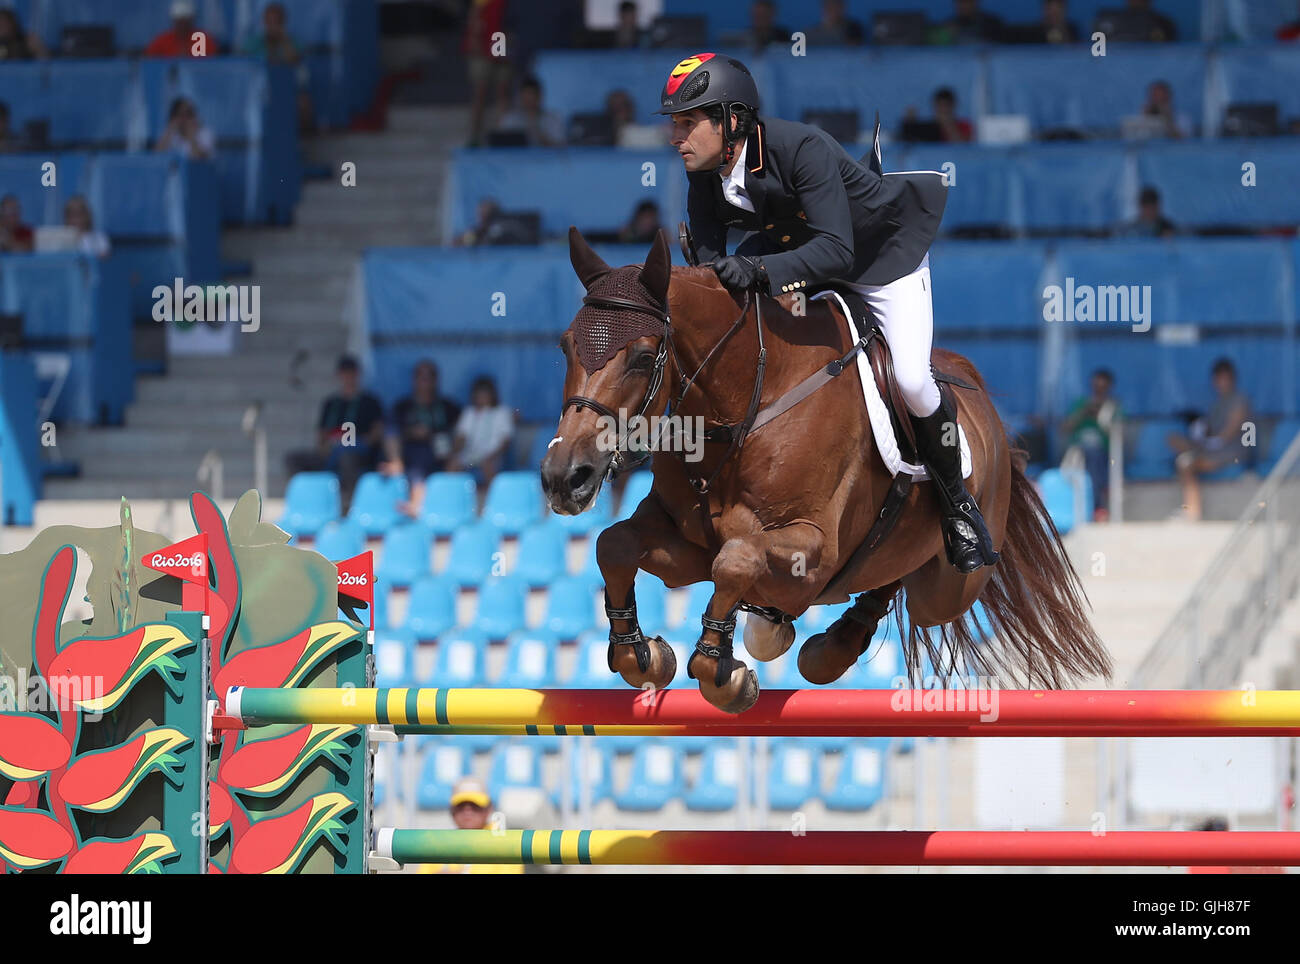 Rio de Janeiro, Brazil. 17th Aug, 2016. Manuel Fernandez Saro of Spain riding U WATCH during the Equestrian Jumping events during the Rio 2016 Olympic Games at Olympic Equestrian Centre Deodoro in Rio de Janeiro, Brazil, 17 August 2016. Photo: Friso Gentsch/dpa/Alamy Live News Stock Photo